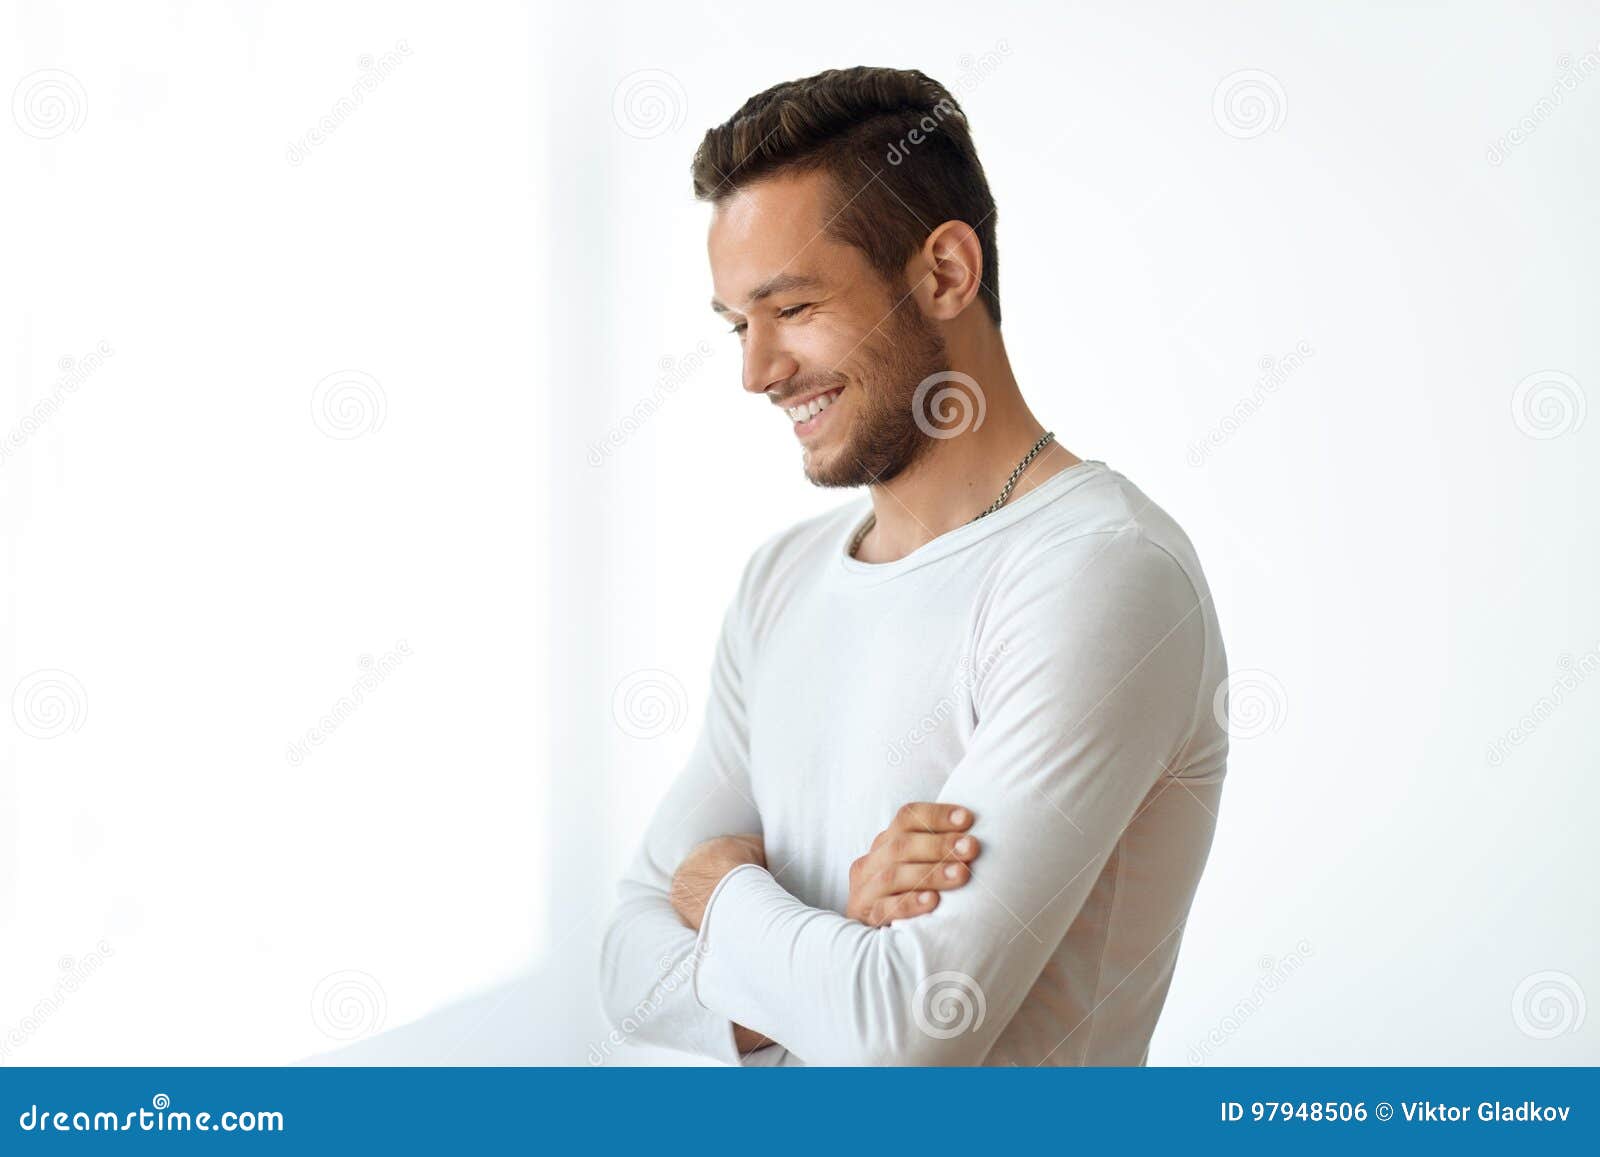 side view portrait of smiling handsome man on white background